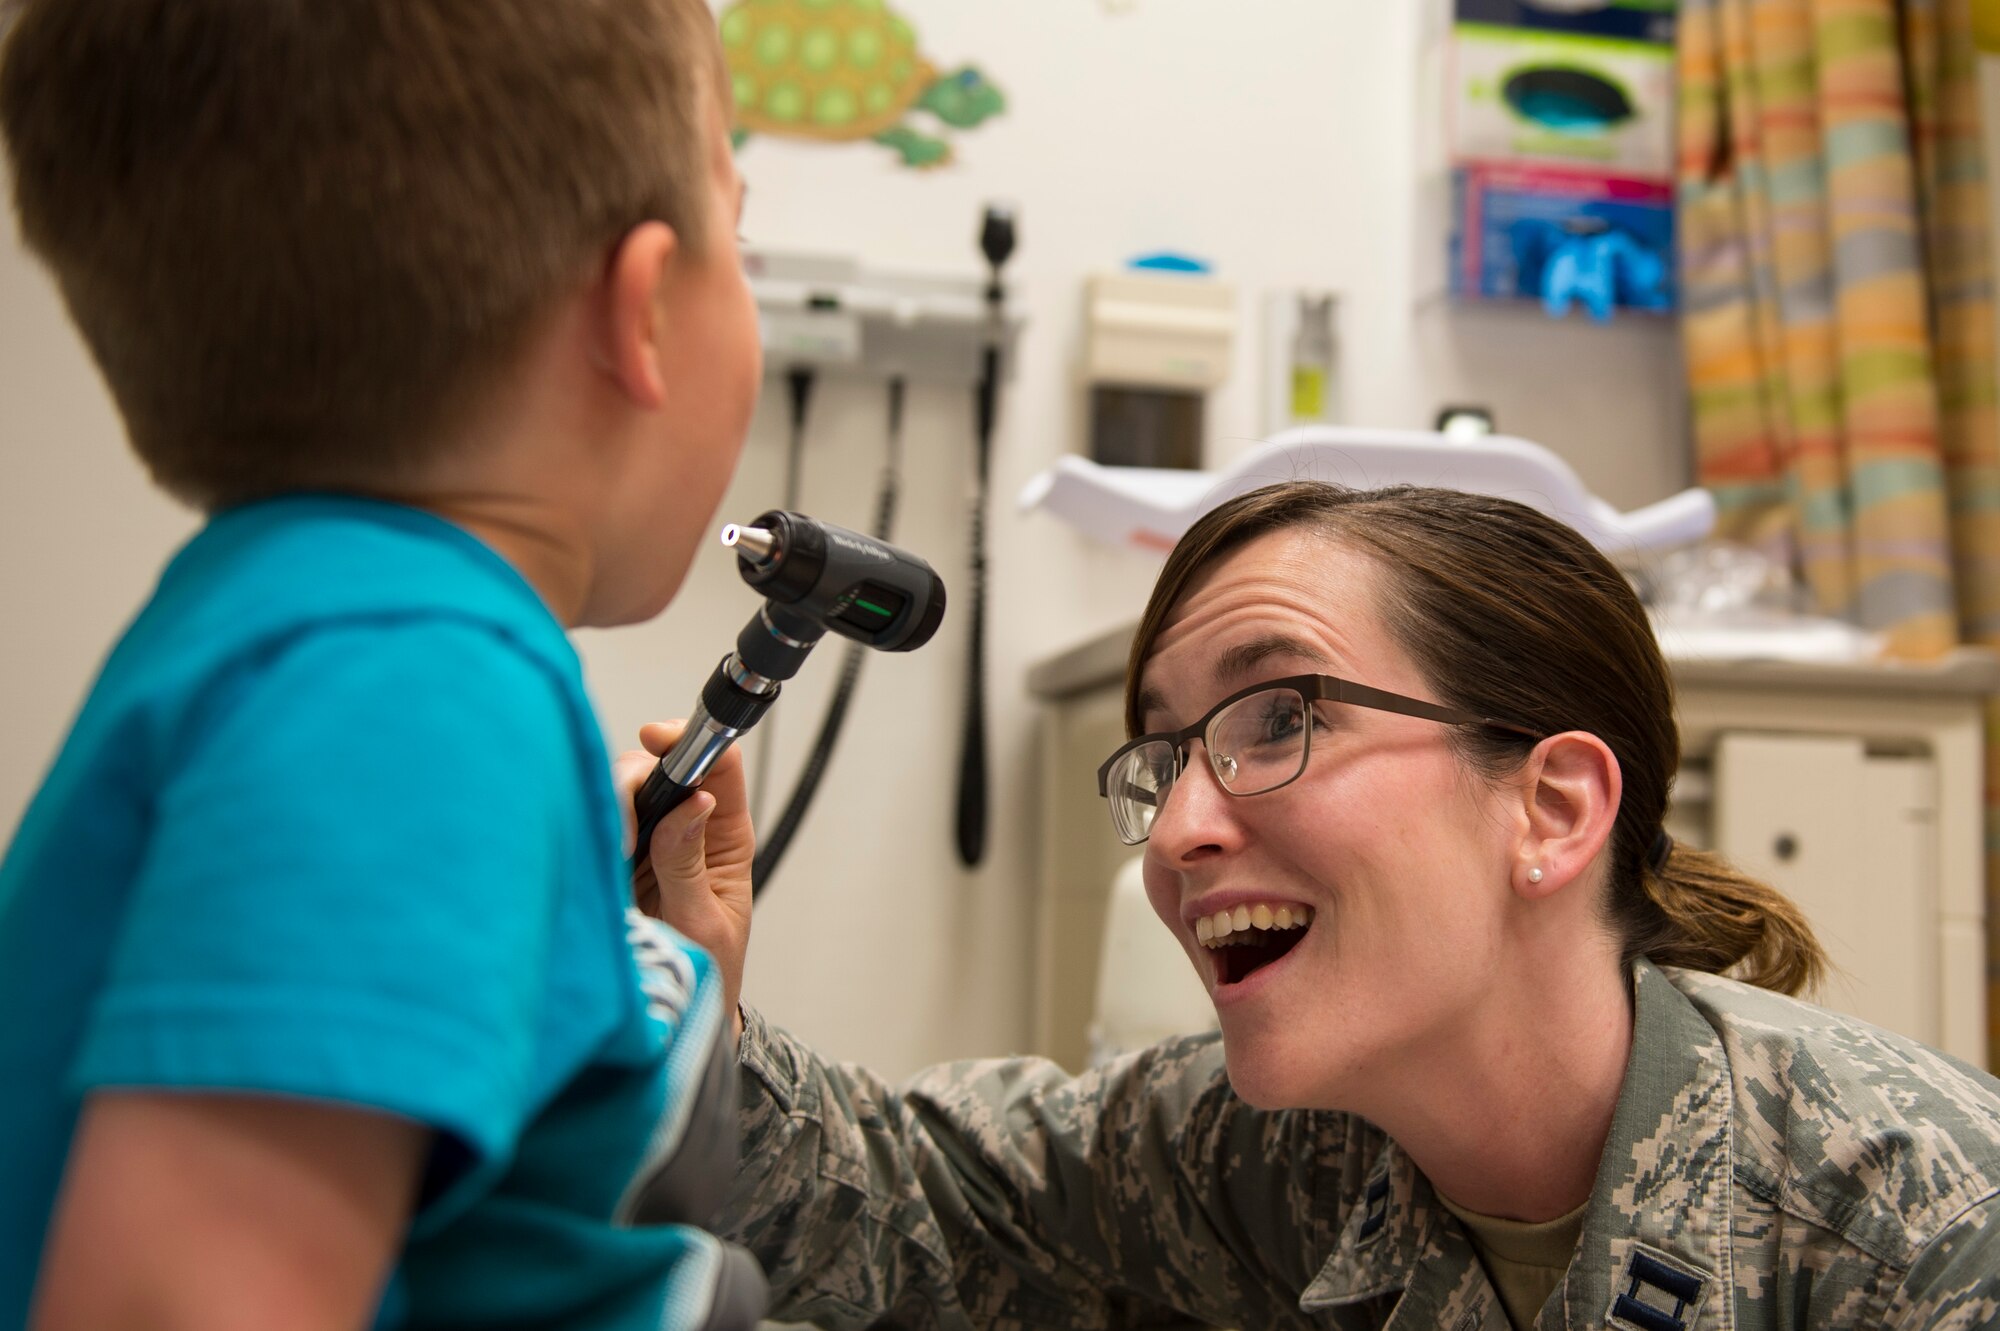 U.S. Air Force Capt. Heather Bezerra, 52nd Medical Operations Squadron pediatric nurse, prepares to examine James, 3, son of Senior Airman Dawn Weber, 52nd Fighter Wing photojournalist, at Spangdahlem Air Base, Germany, May 10, 2018. (U.S. Air Force photo by Senior Airman Dawn M. Weber)